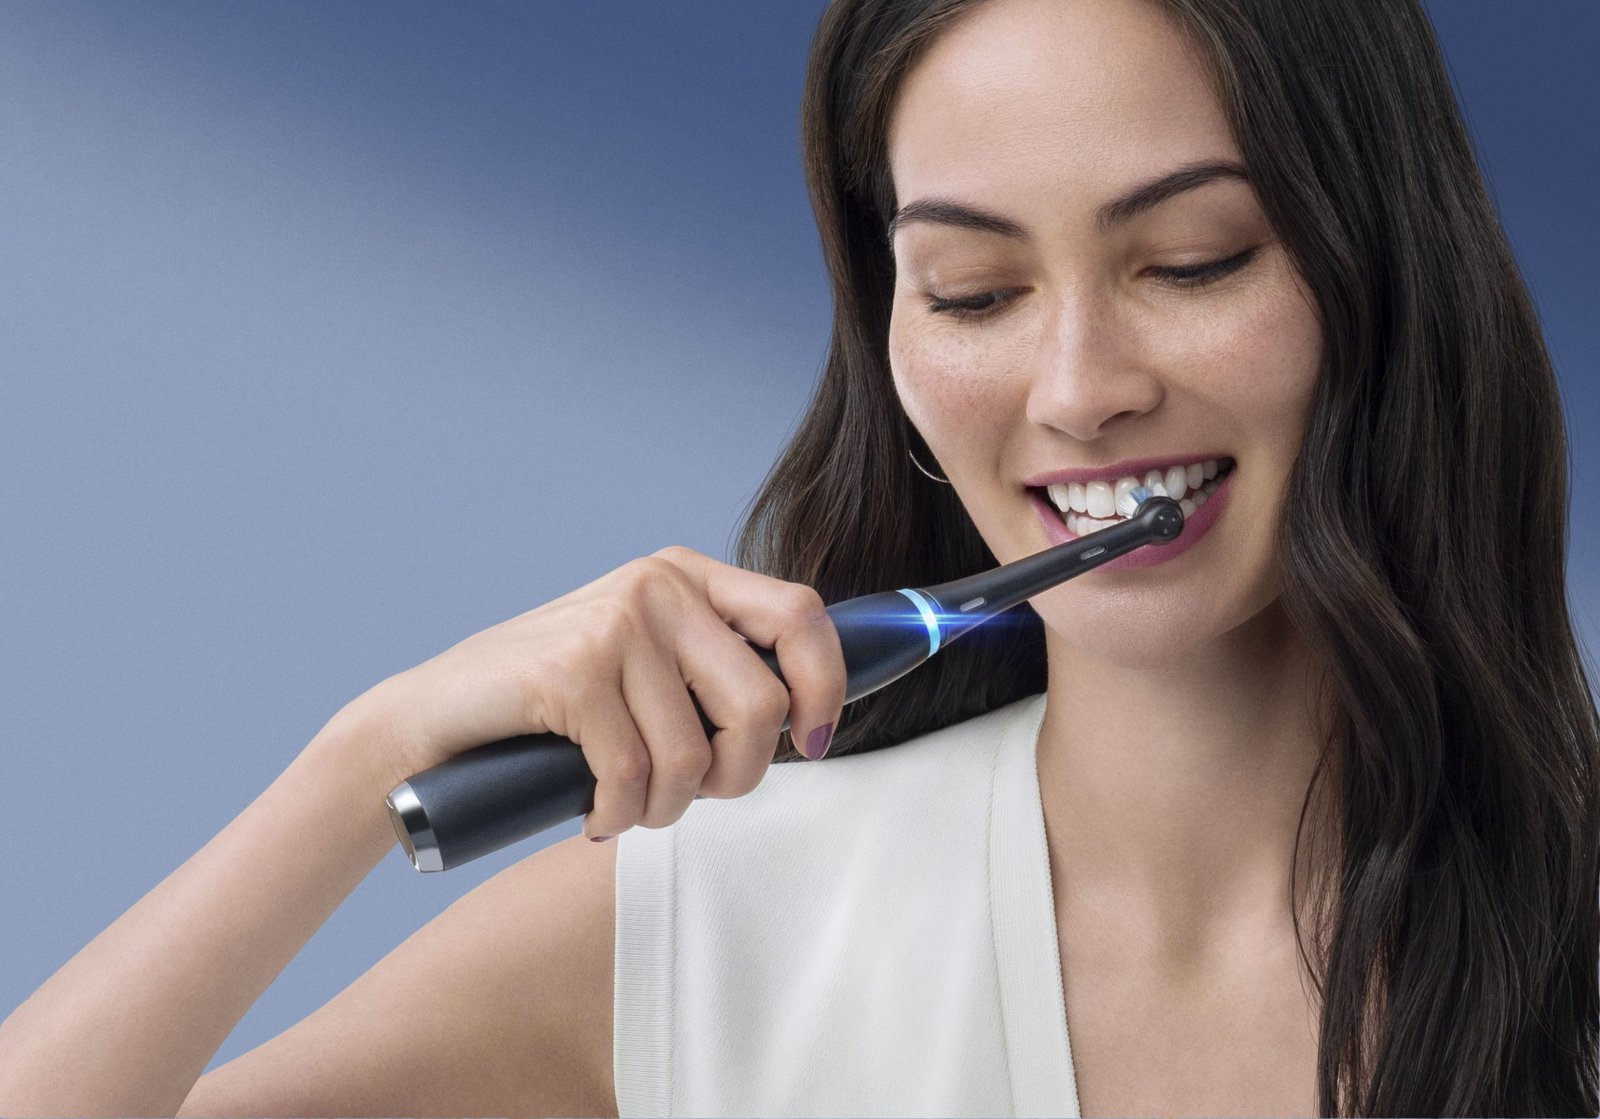 oral-b-io-the-biggest-innovation-in-oral-care-history-the-brandberries